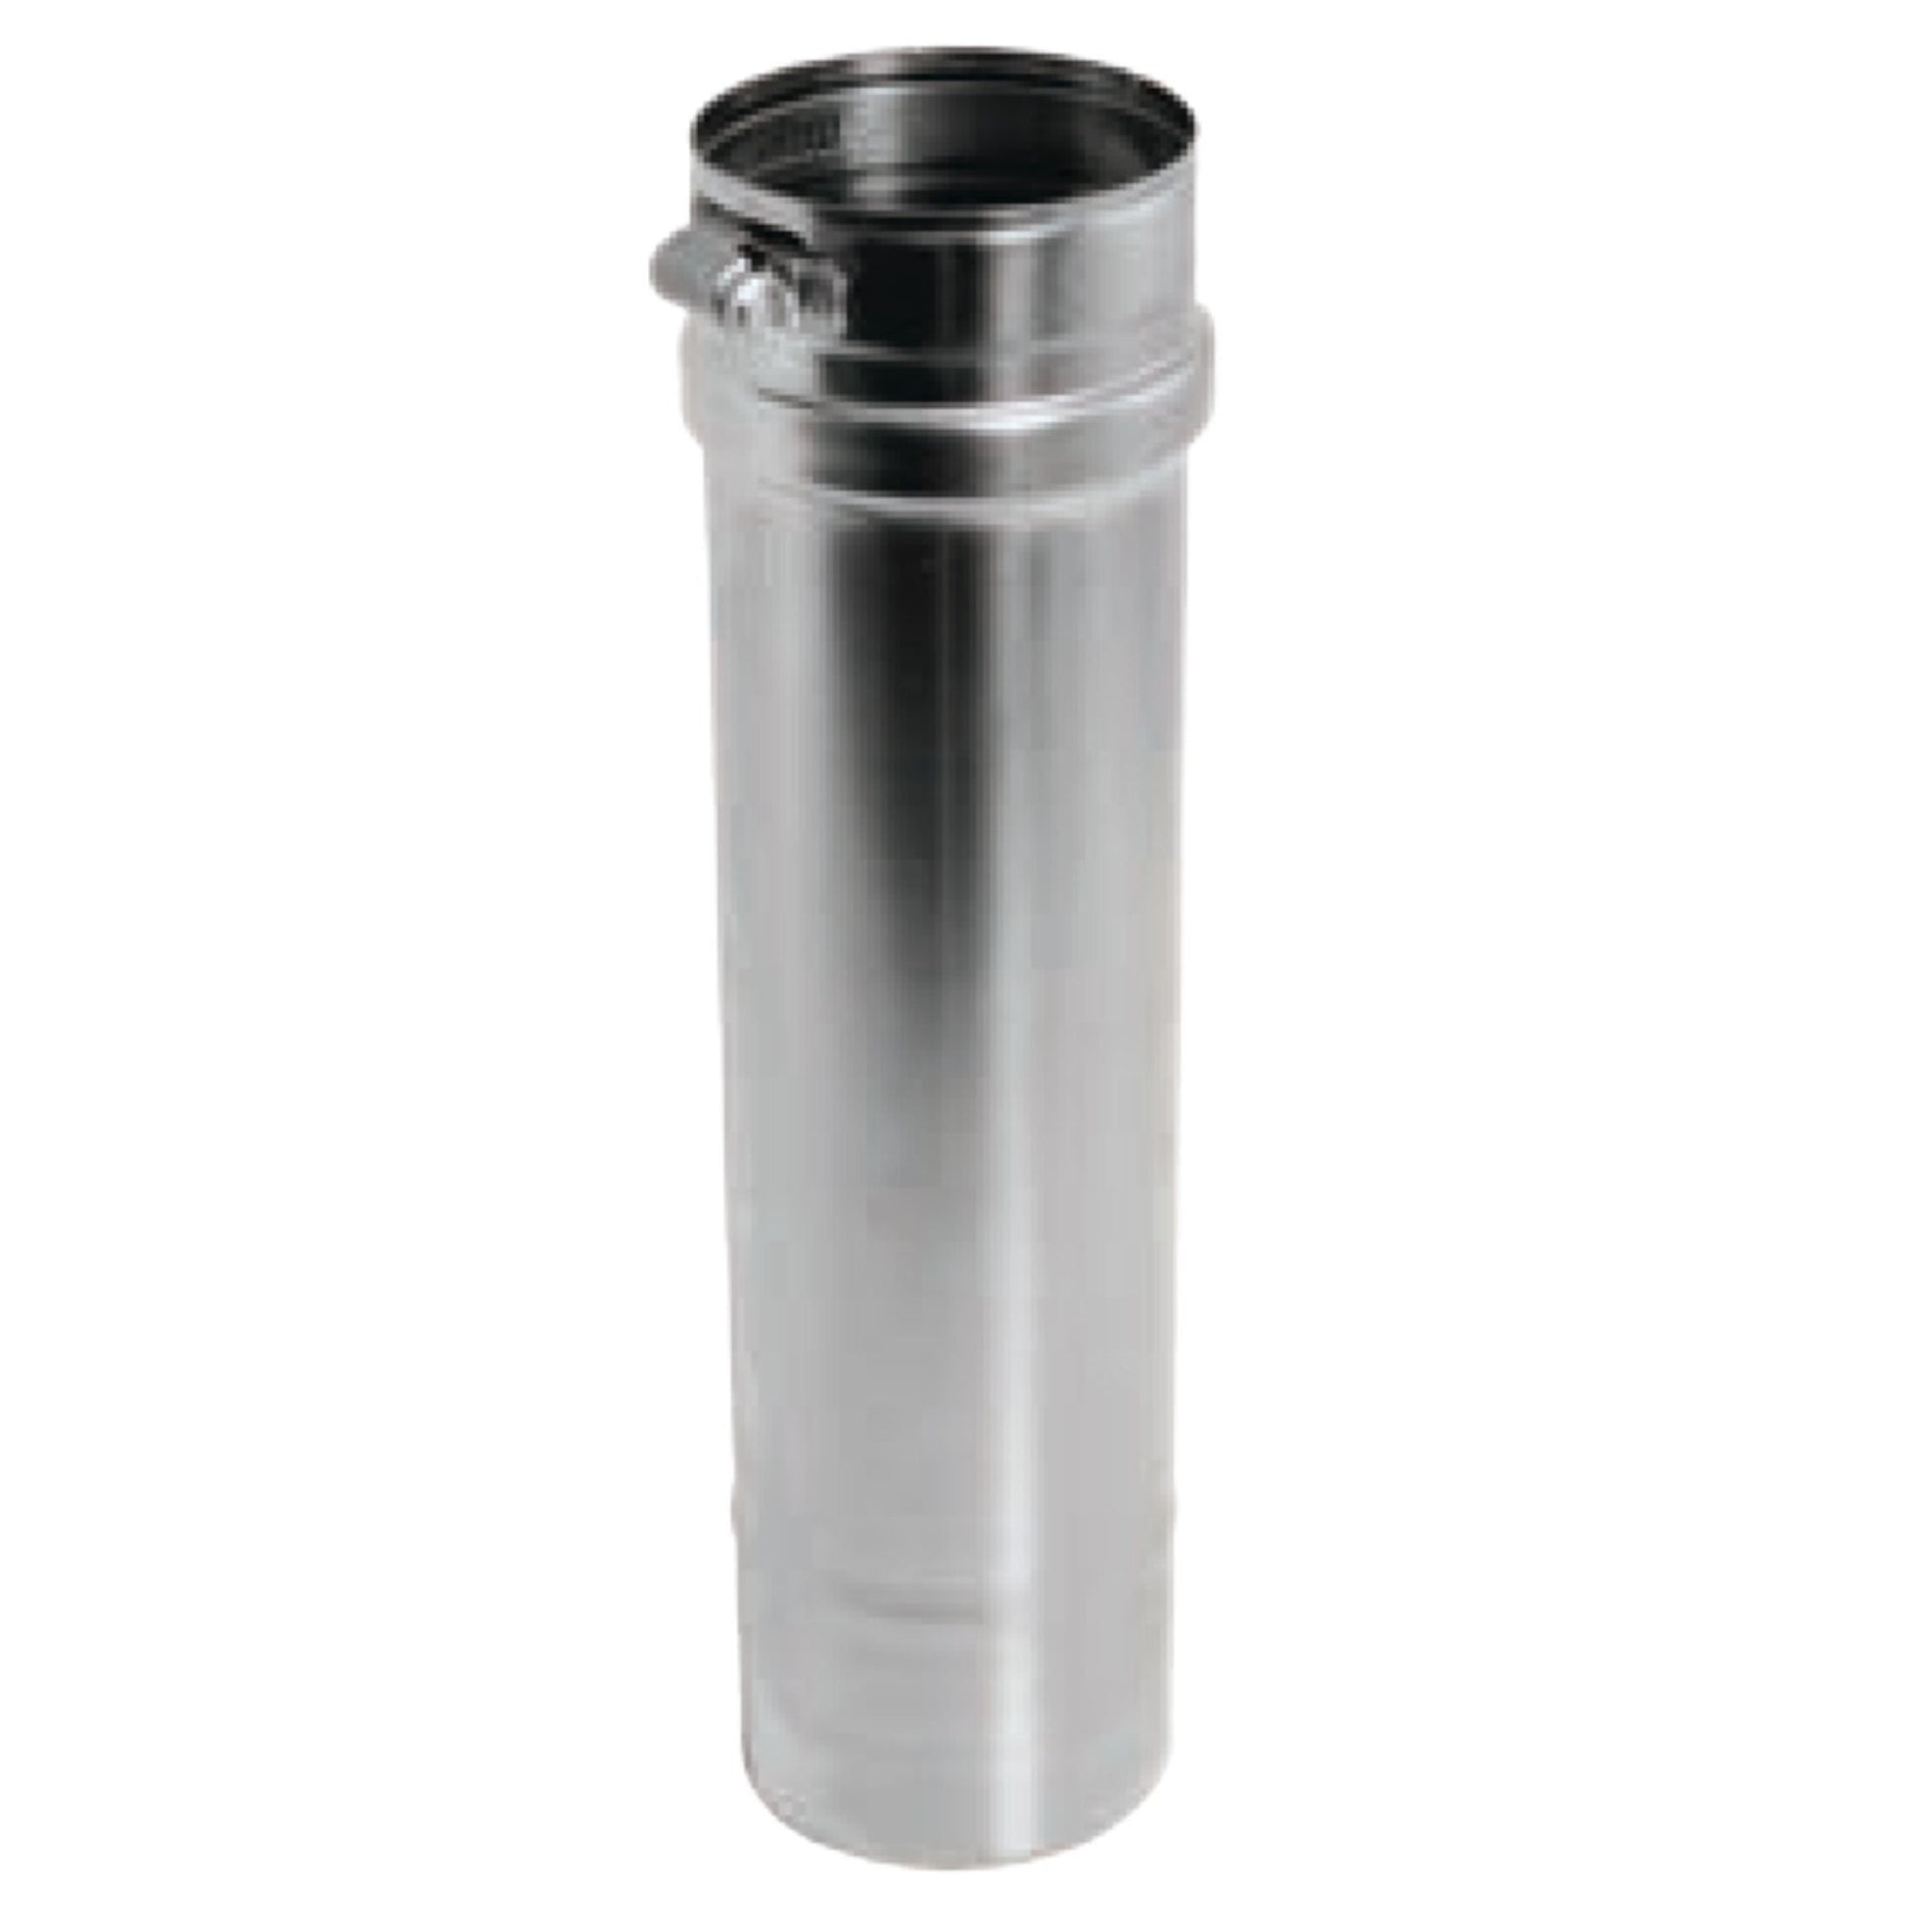 DuraVent FasNSeal 4" x 6" 316L Stainless Steel Vent Length